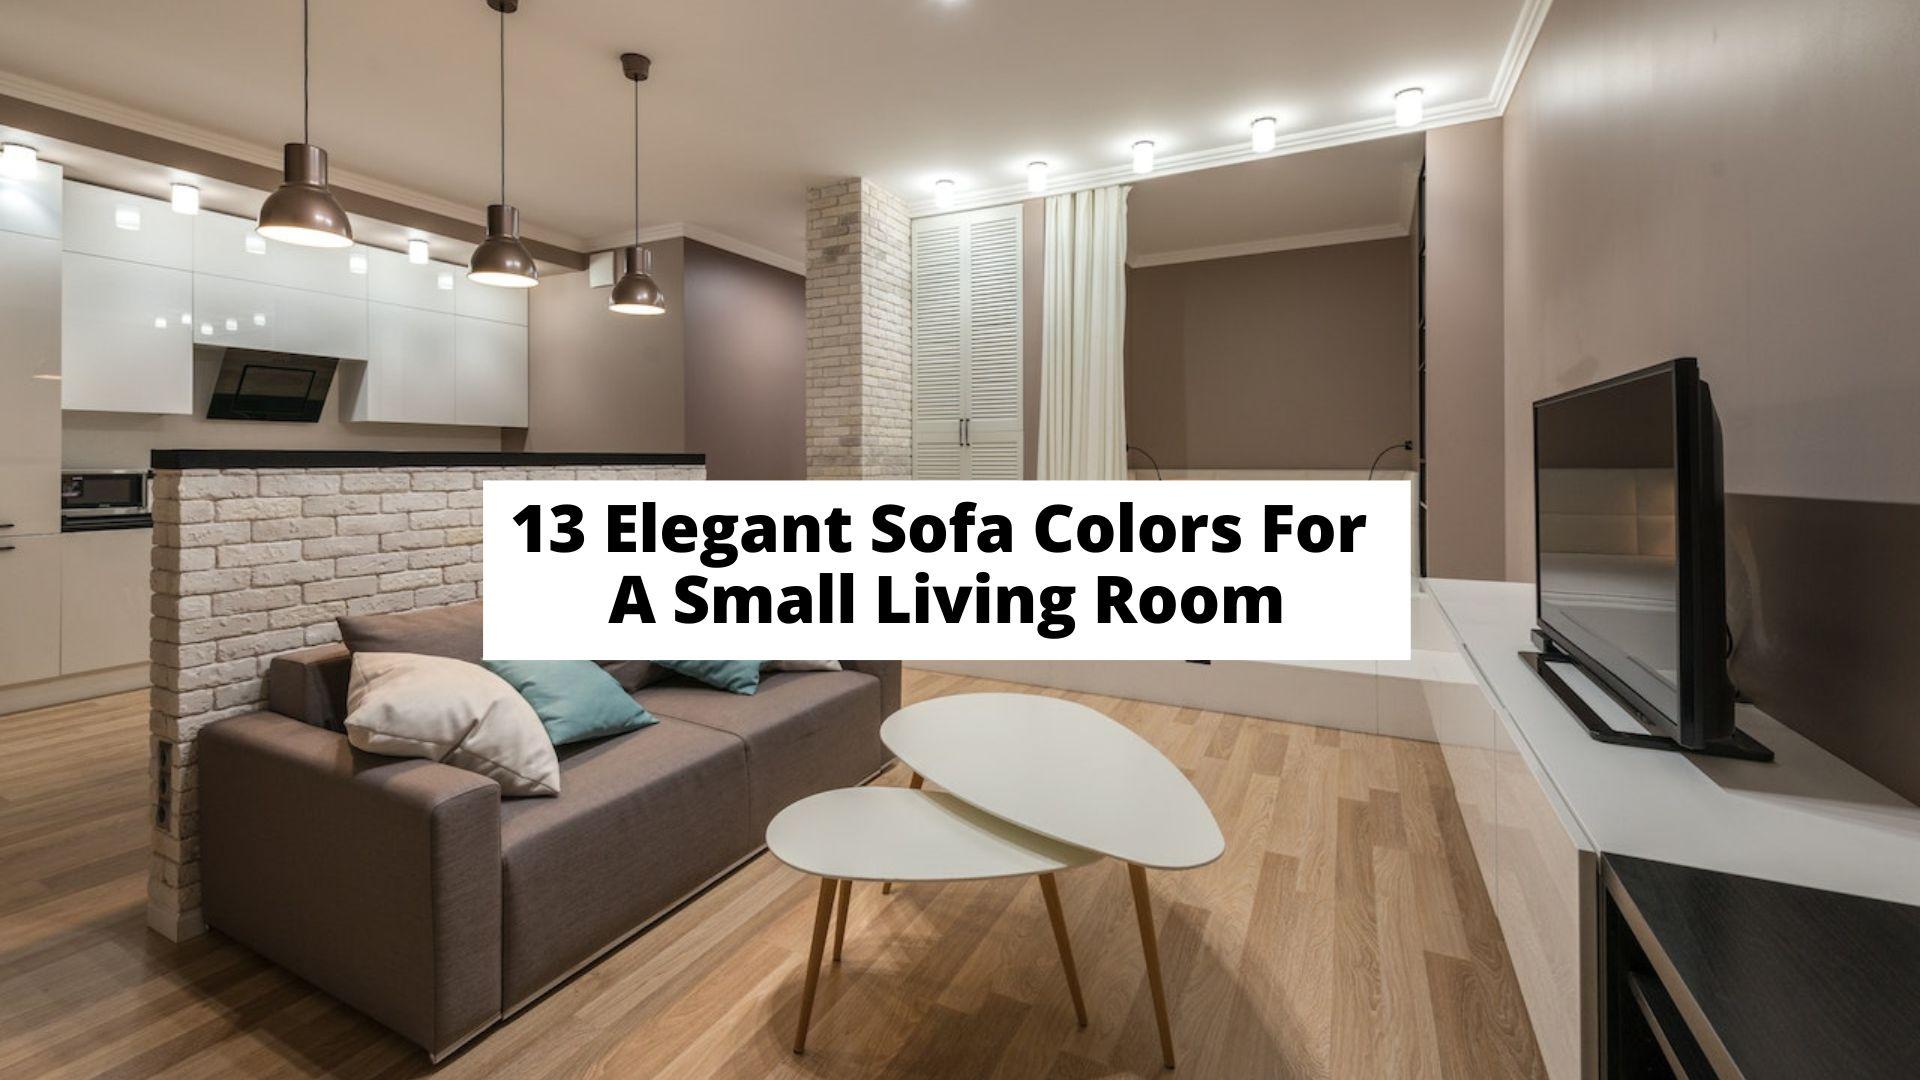 Sofa Colors For A Small Living Room